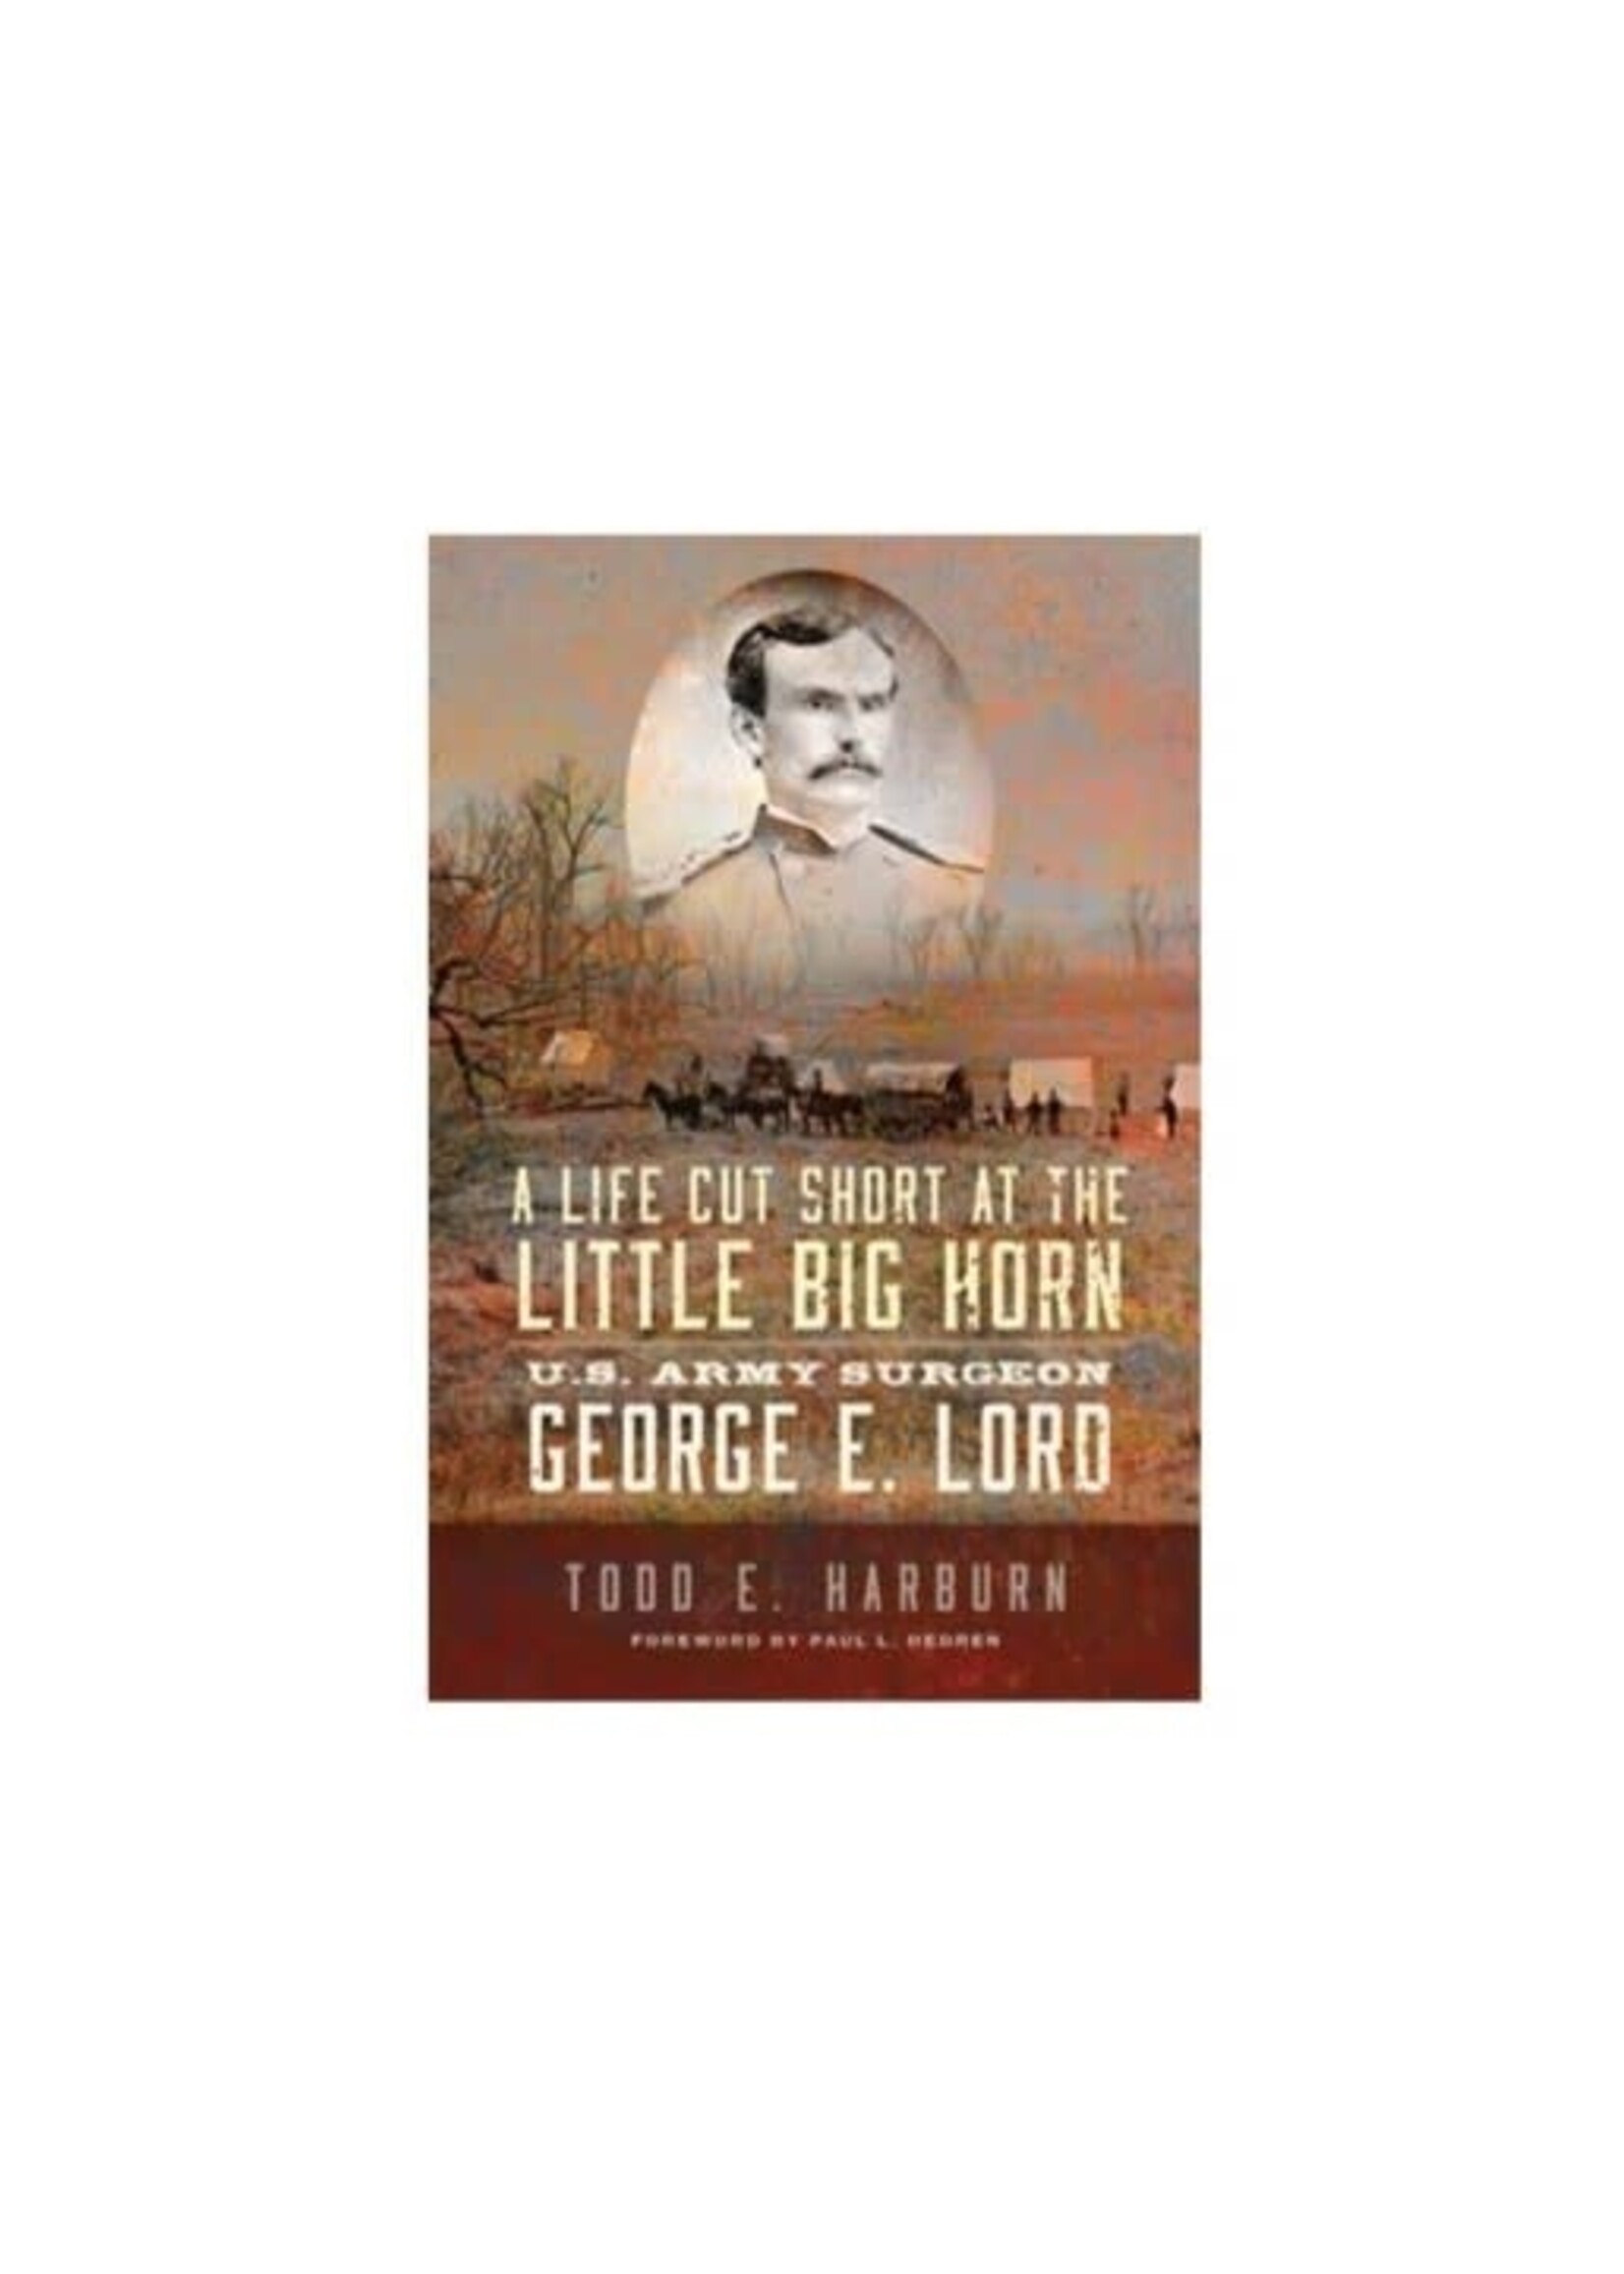 A Life Cut Short at the Little Big Horn: U.S. Army Surgeon George E. Lord